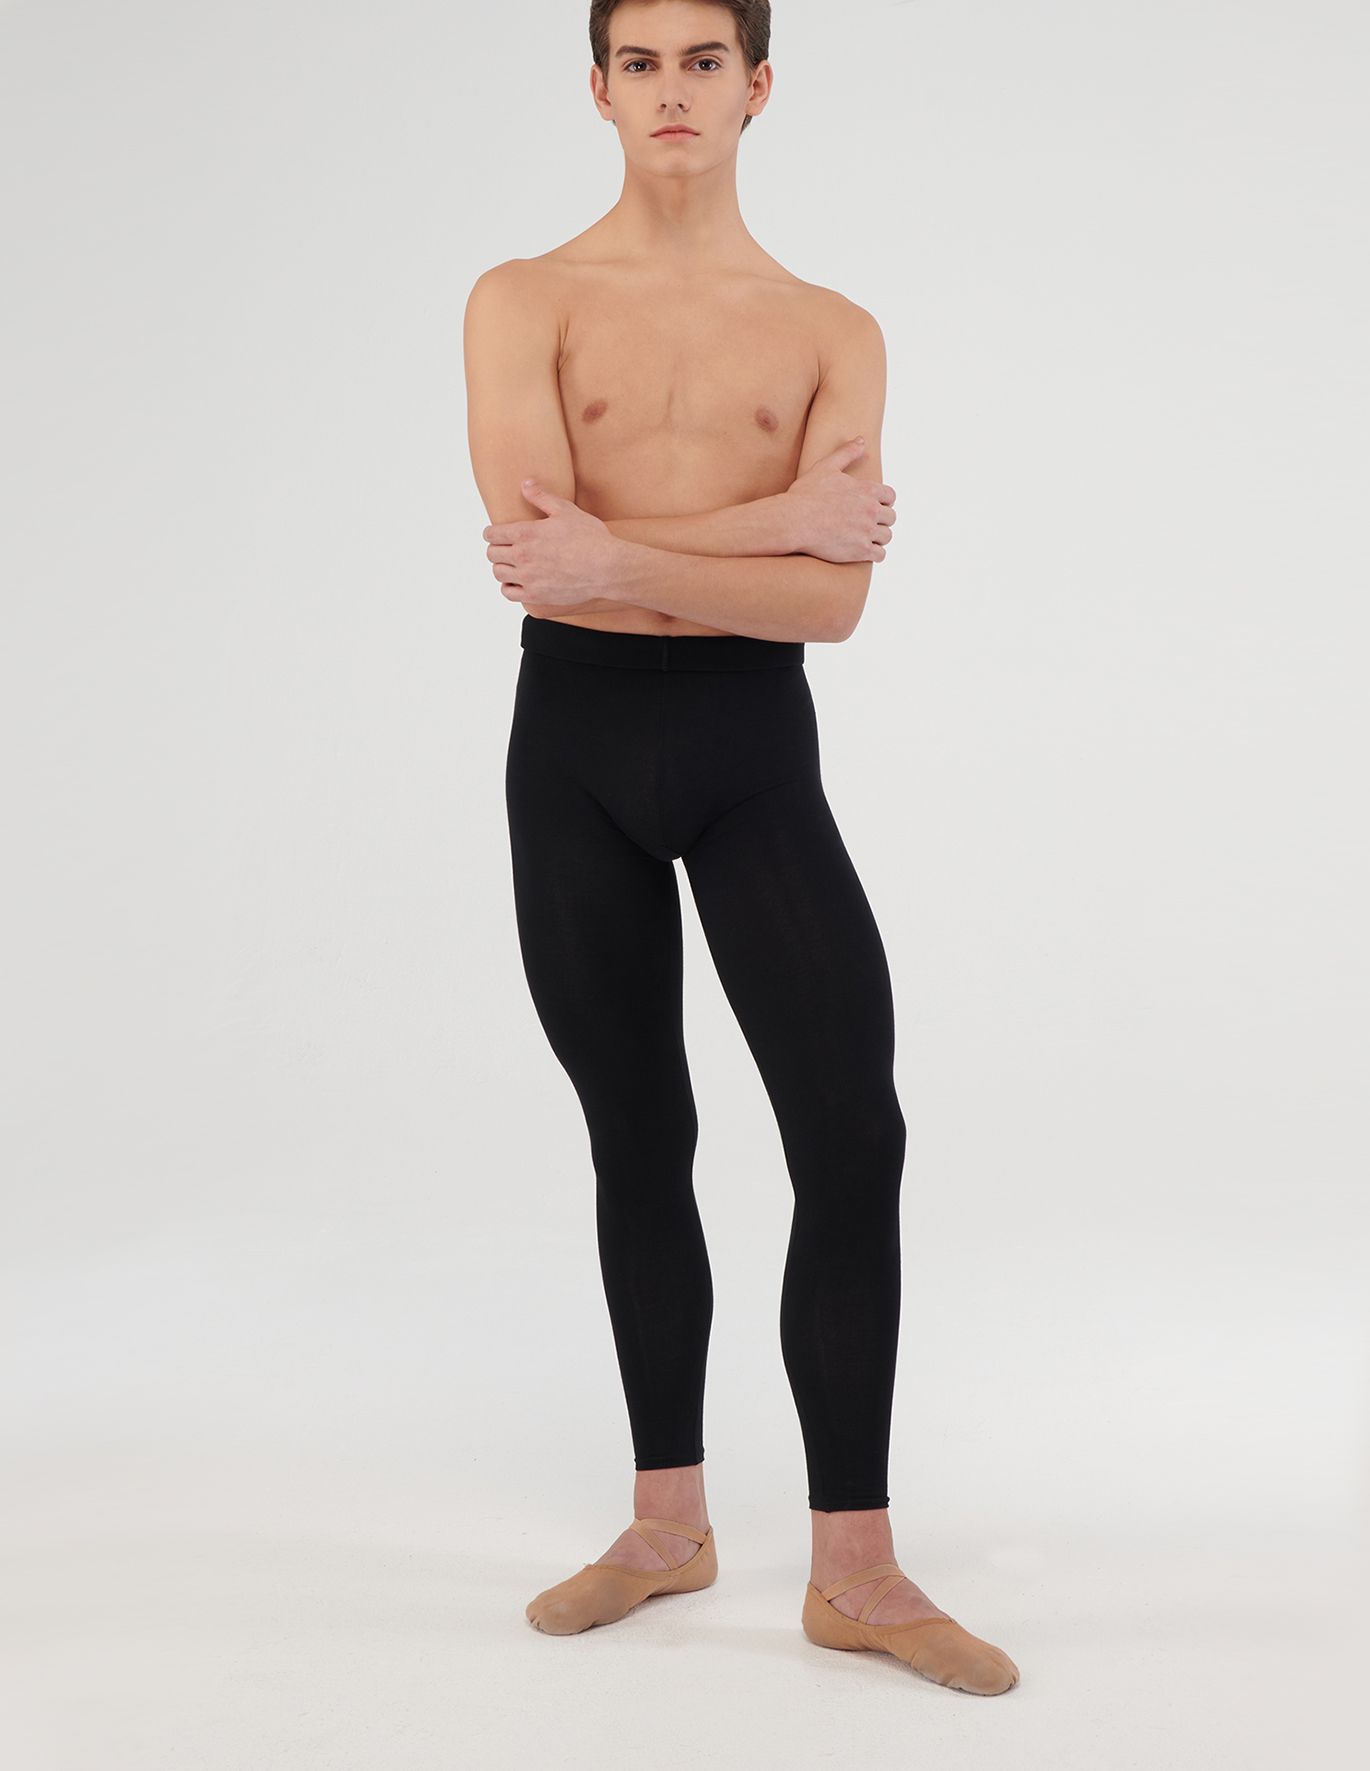 Freed Boys and Mens RAD Grade 3 to 8 Stirrup Cotton Tights